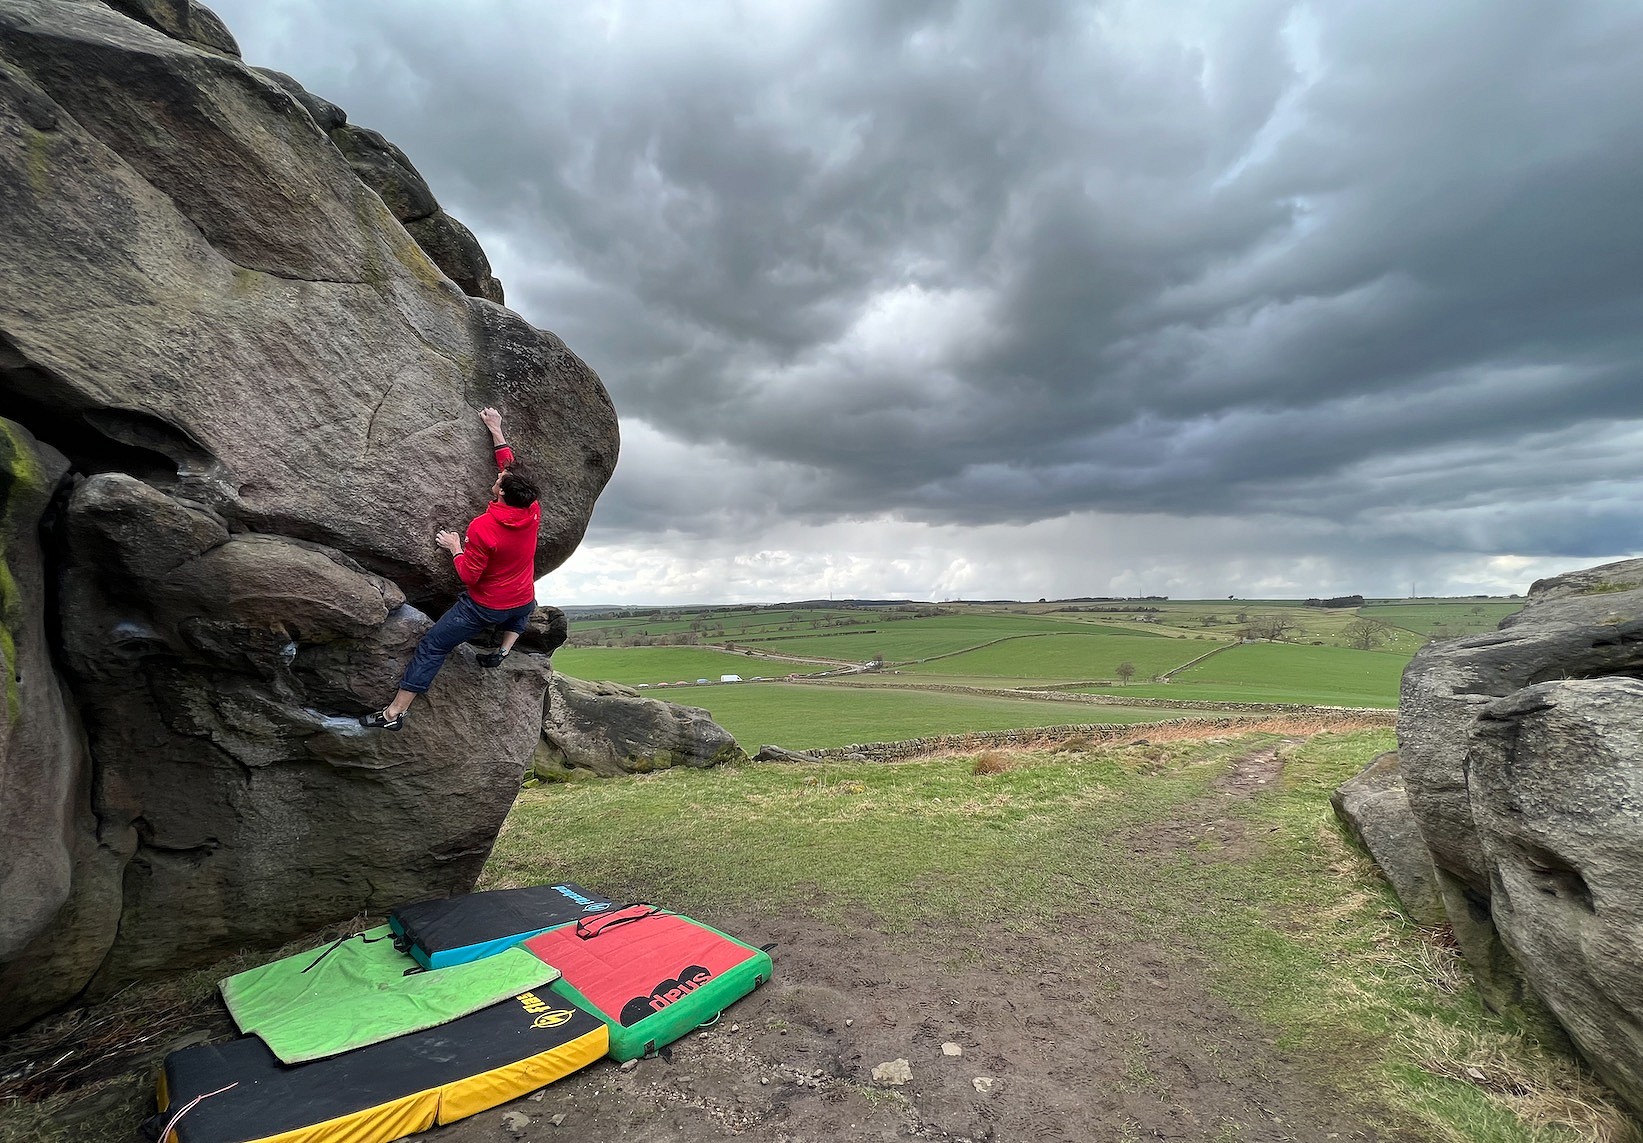 The Vapour S in use on Morrell's Wall, Almscliff  © UKC Gear